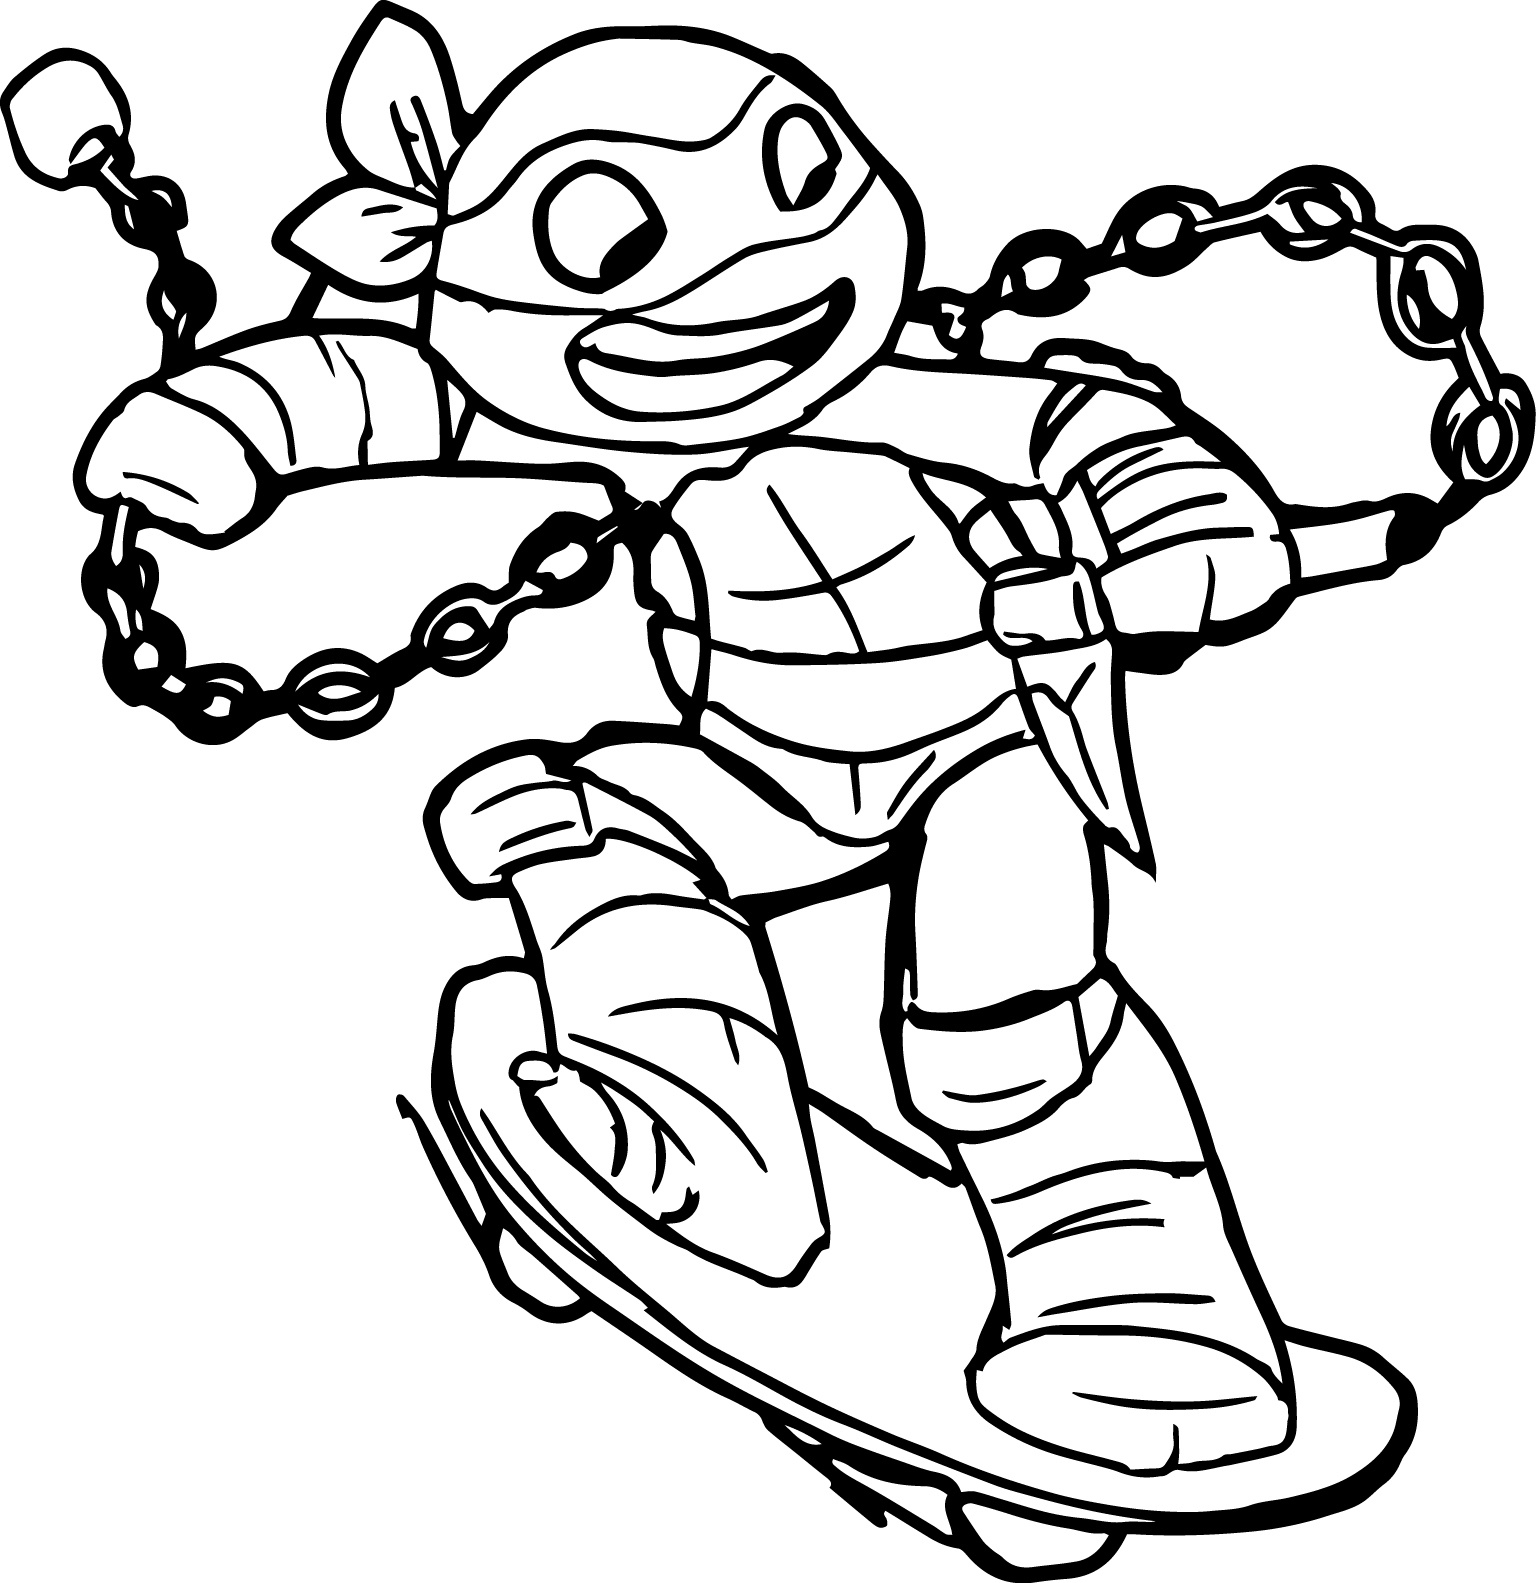 Coloring Pages Of J Easy Turtle Coloring Page With Teenage Mutant Ninja Turtles Coloring